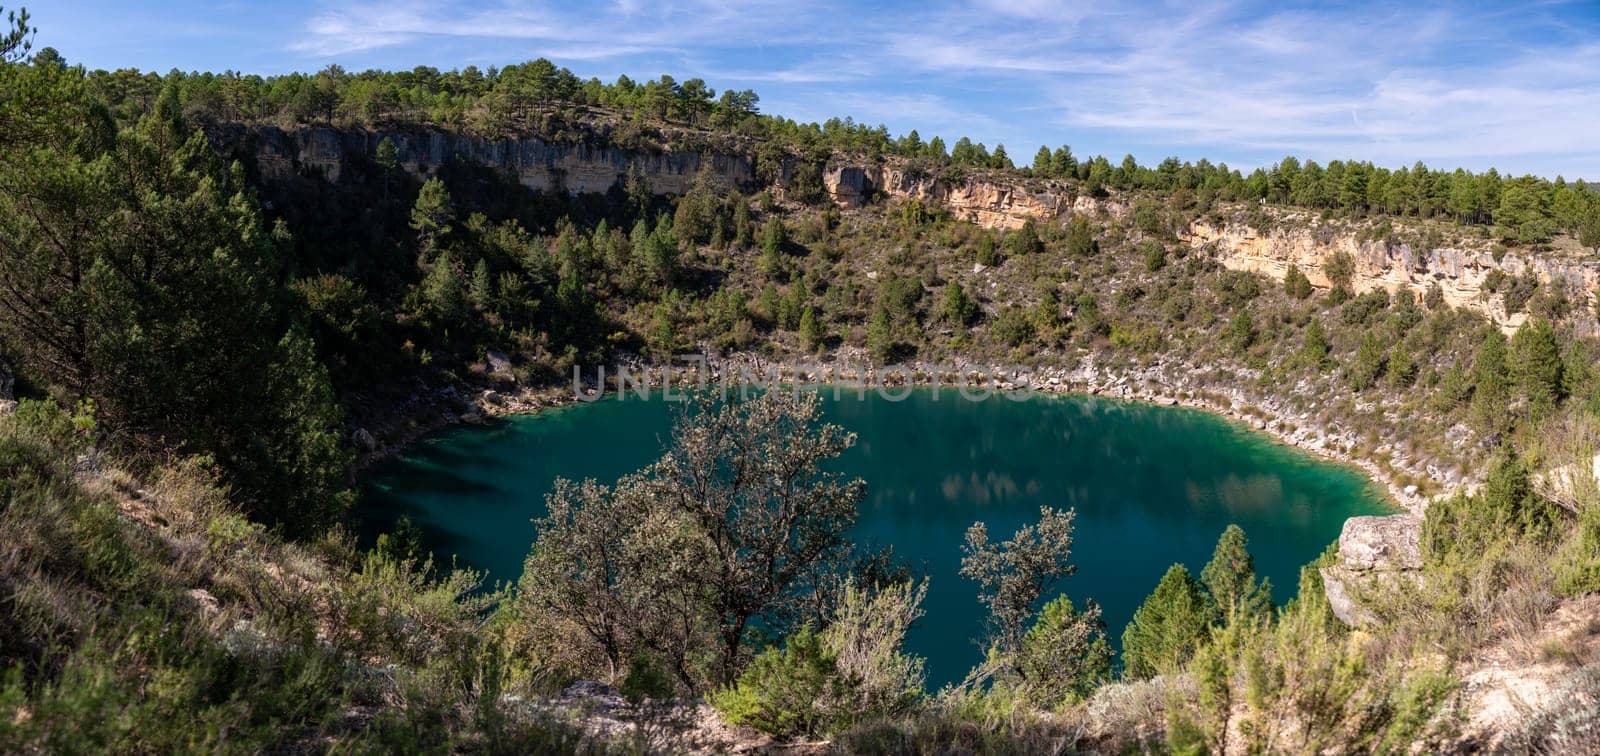 Serene Natural Landscape with Turquoise Lake Surrounded by Trees by FerradalFCG